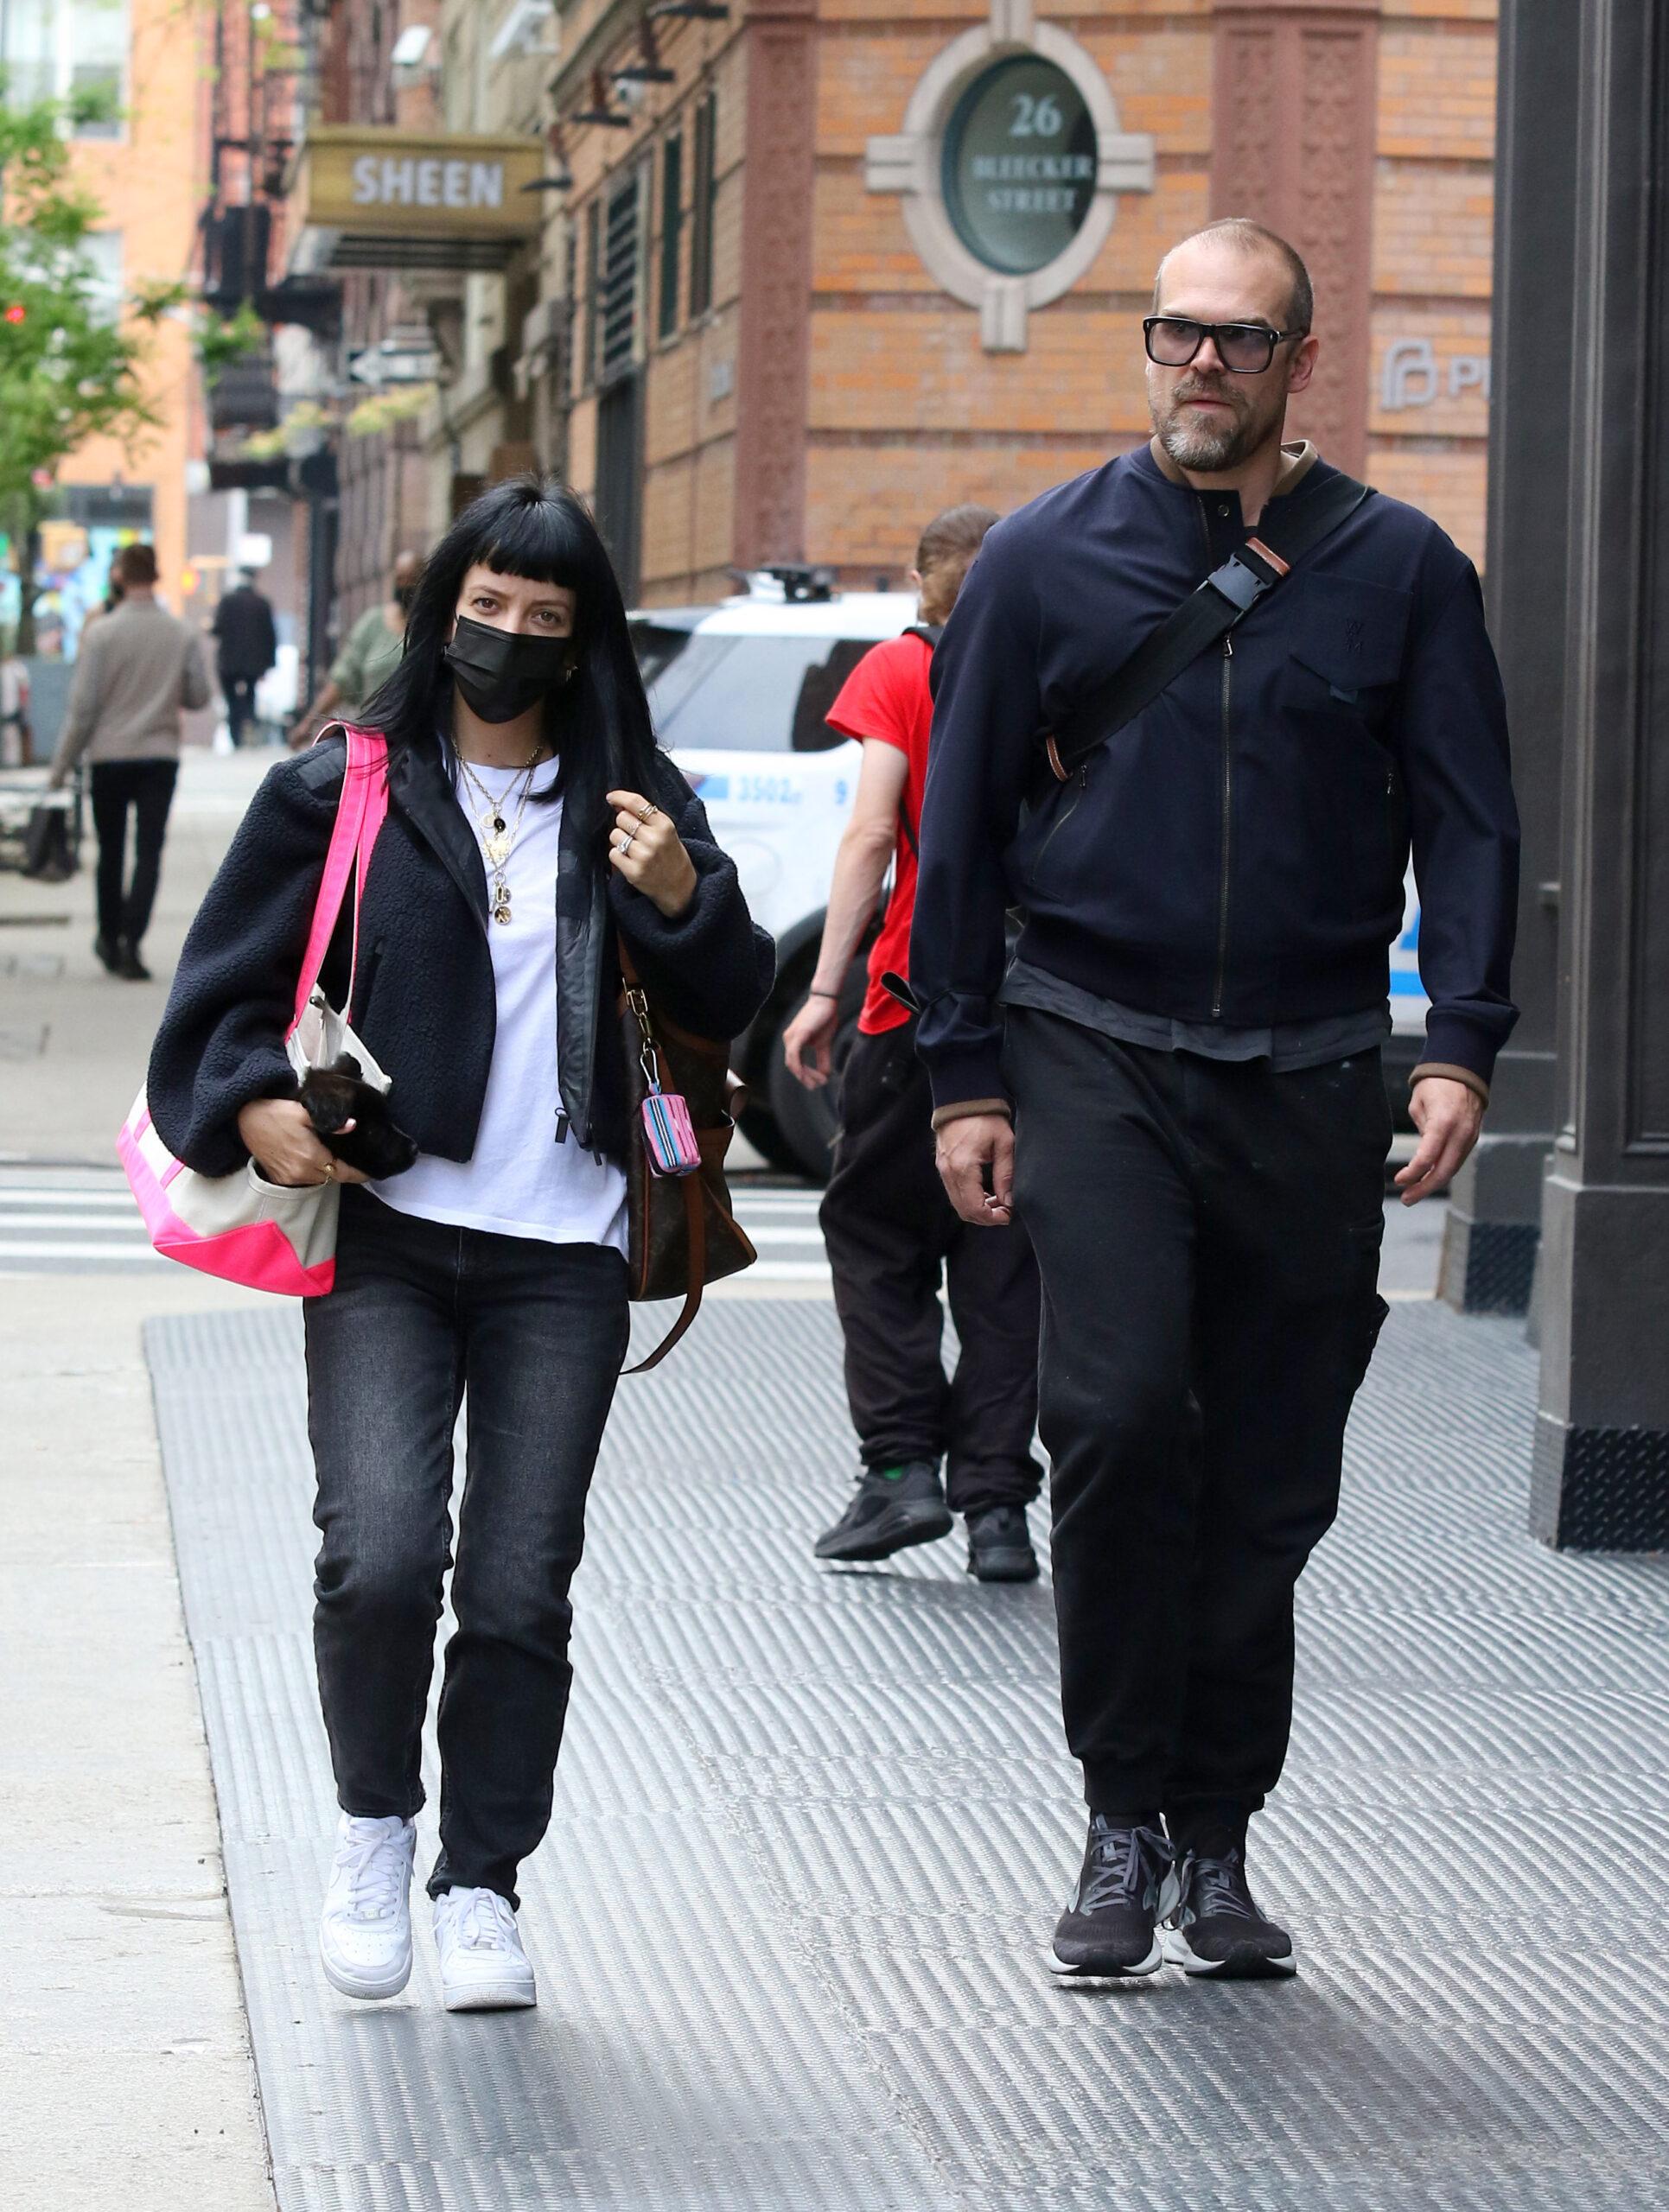 Lily Allen and husband David Harbour go out for a walk with their new puppy quot Mary quot inside a bag in NYC